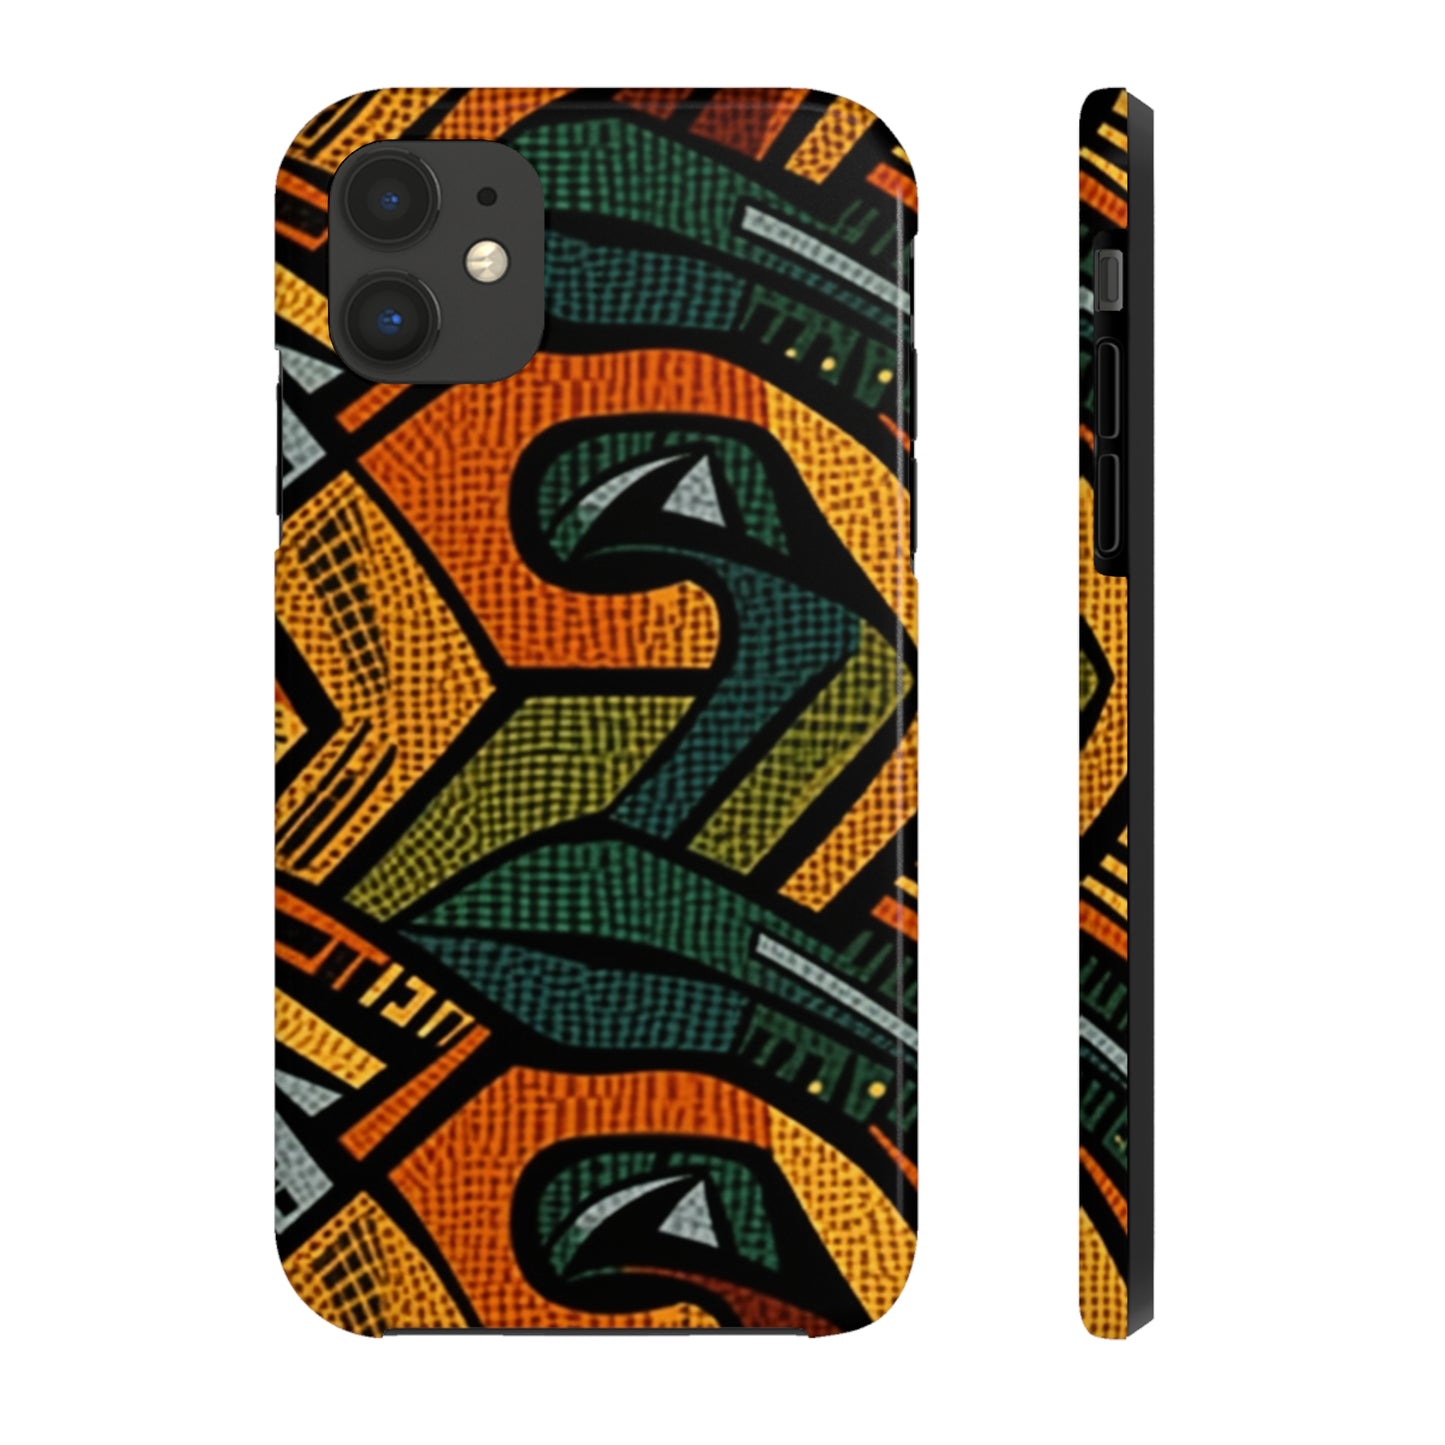 1960-1970s Style African Ornament Textile - Bold, Intricate Pattern - Tough Phone Cases